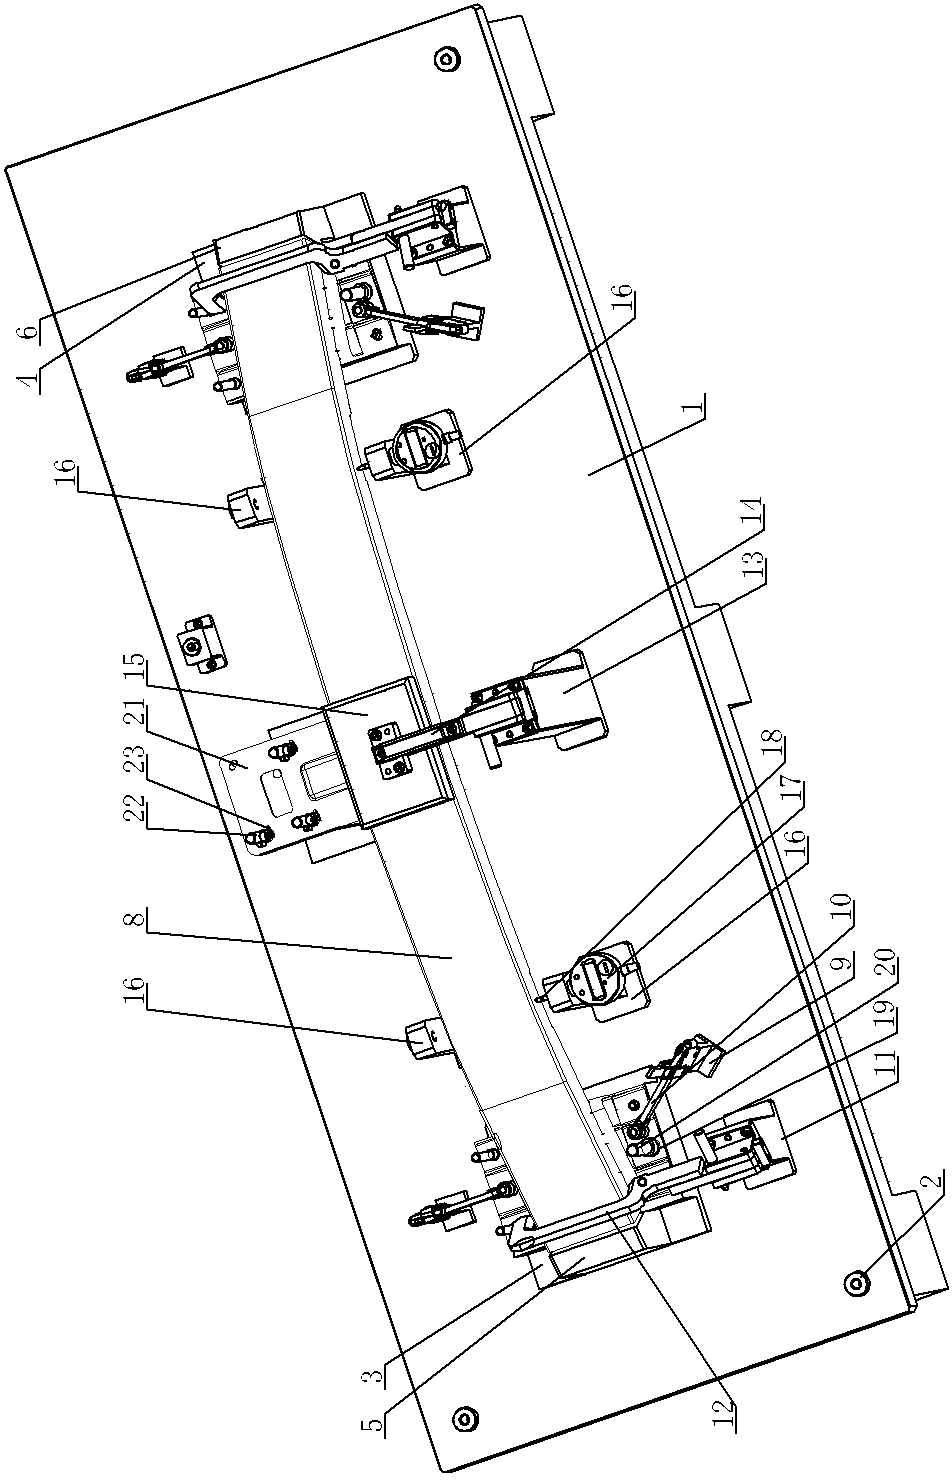 A checking fixture structure of automobile front bumper